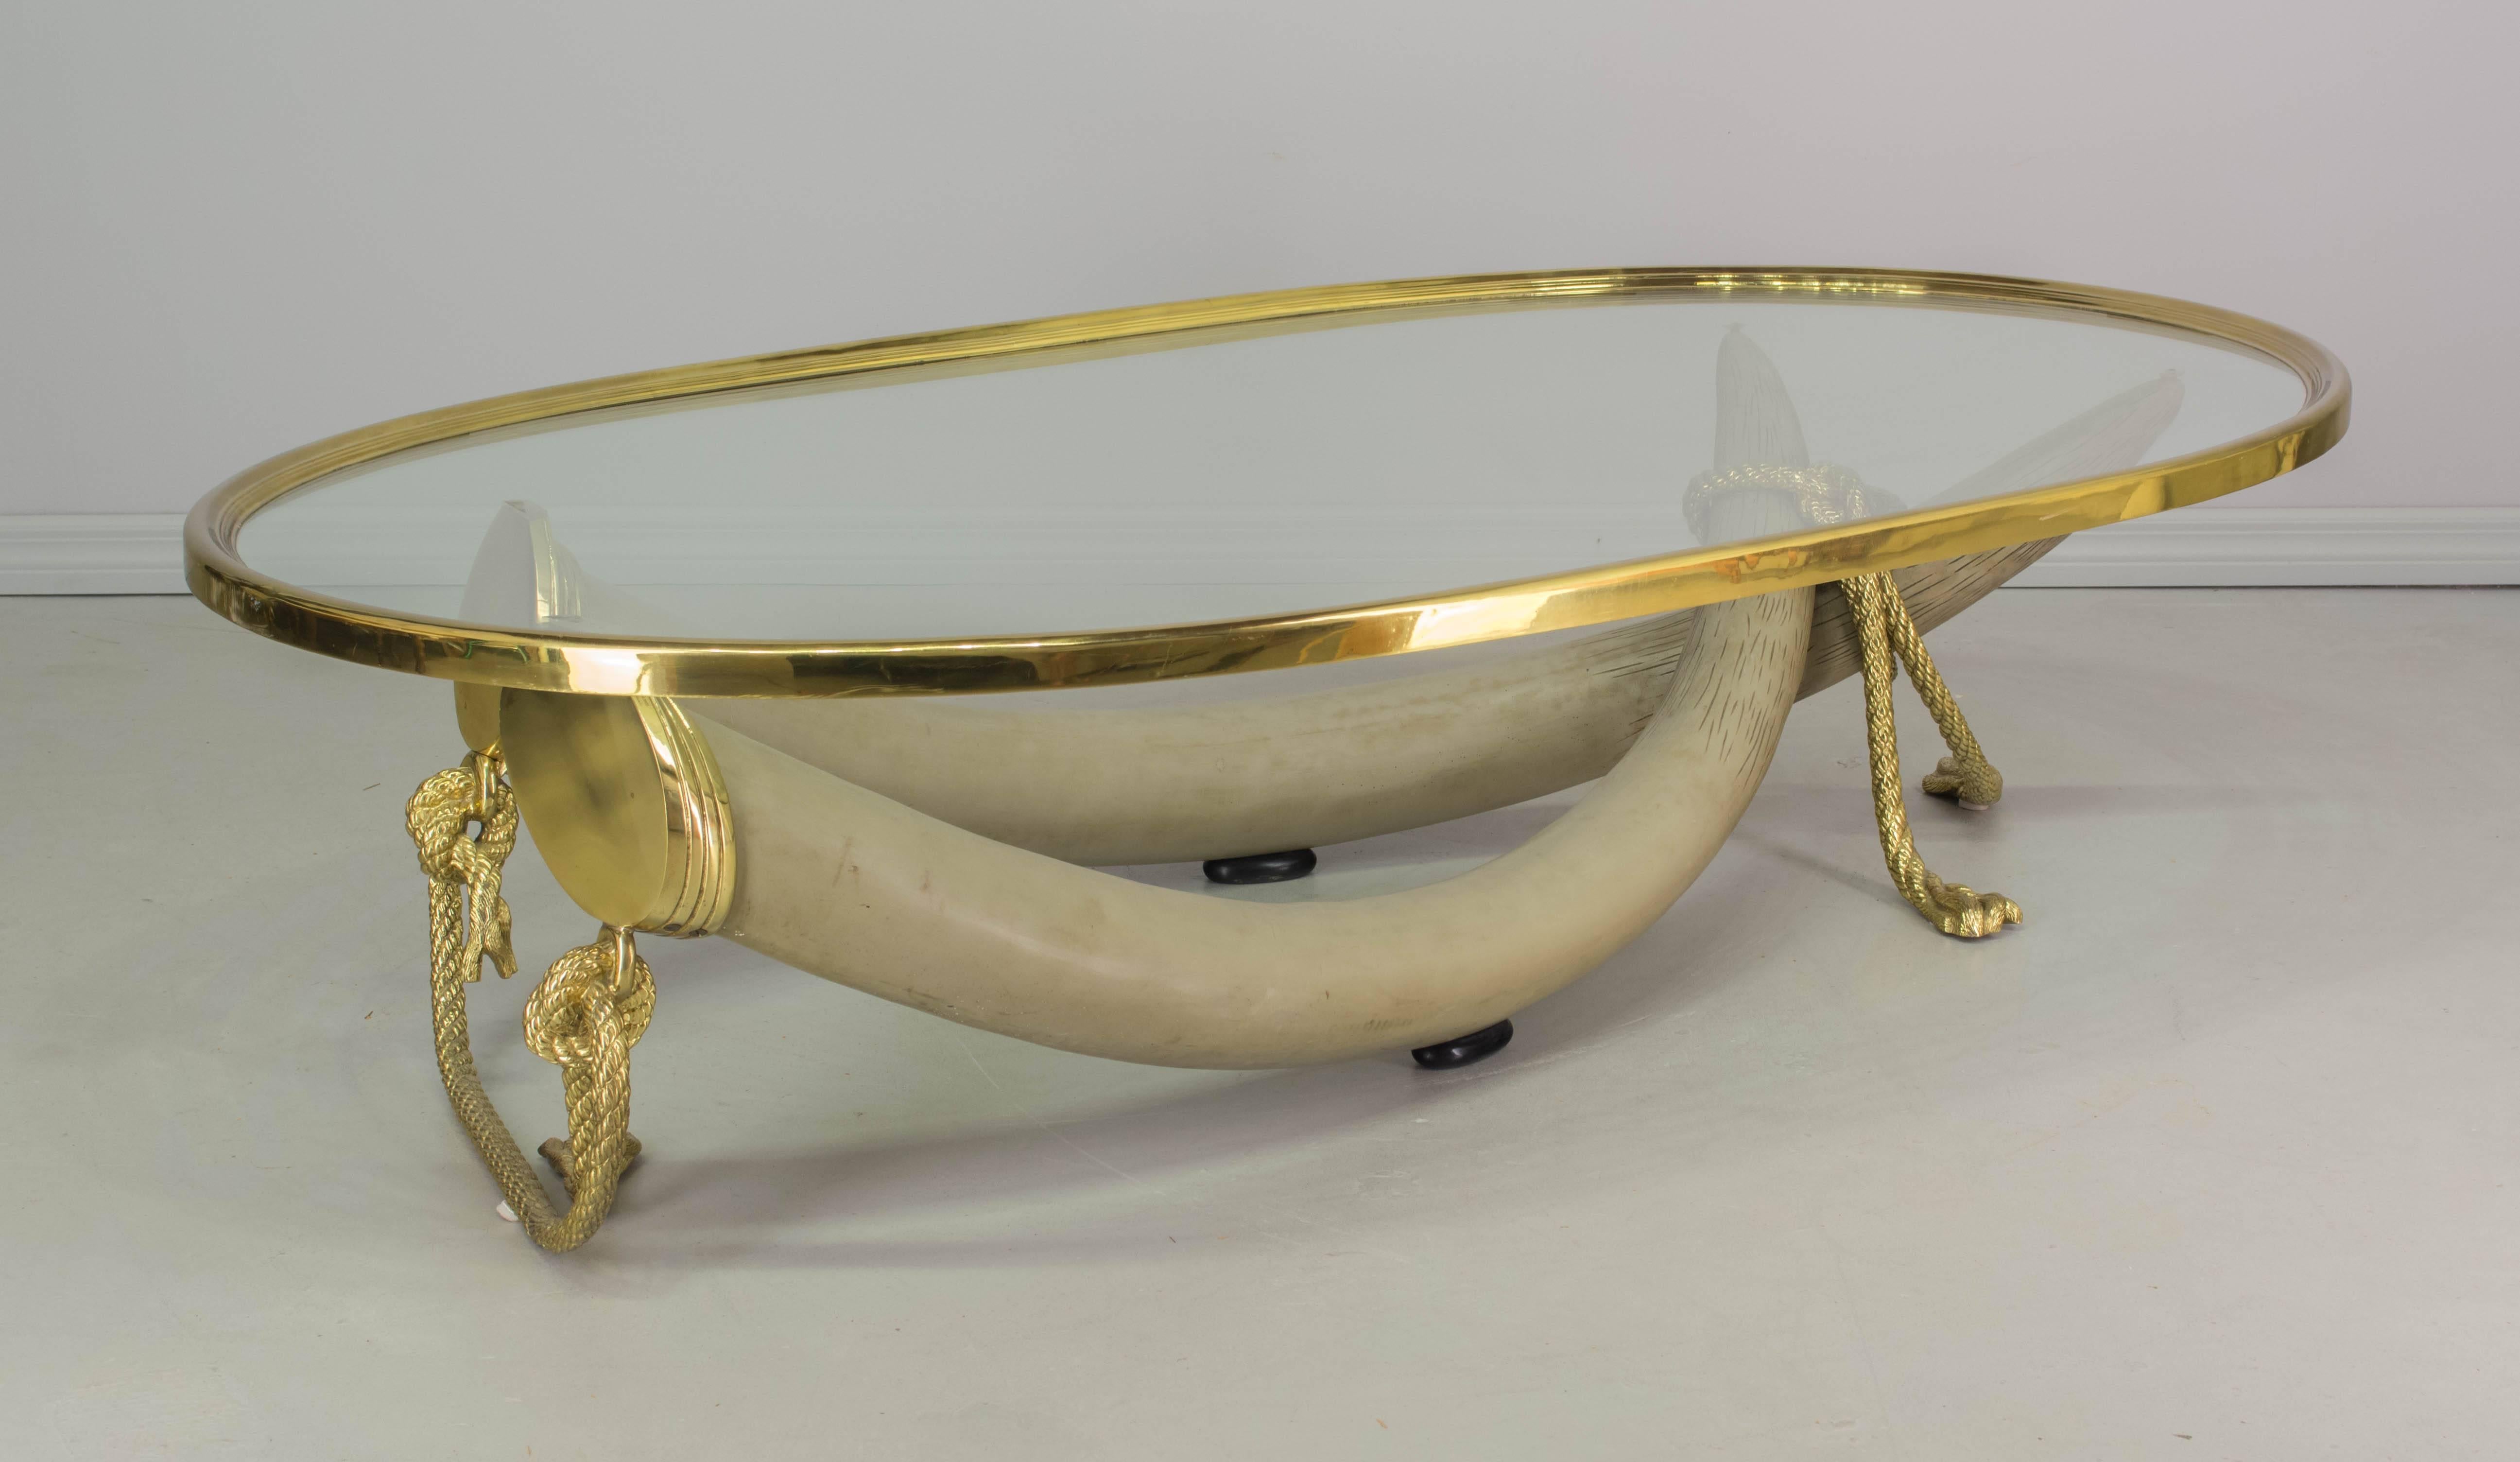 A large Spanish coffee table of exceptional quality designed by Valenti of Madrid. Sculptural base is comprised of two life-size resin faux elephant tusks capped and "tied" together with solid polished brass ropes. Heavy brass banded glass